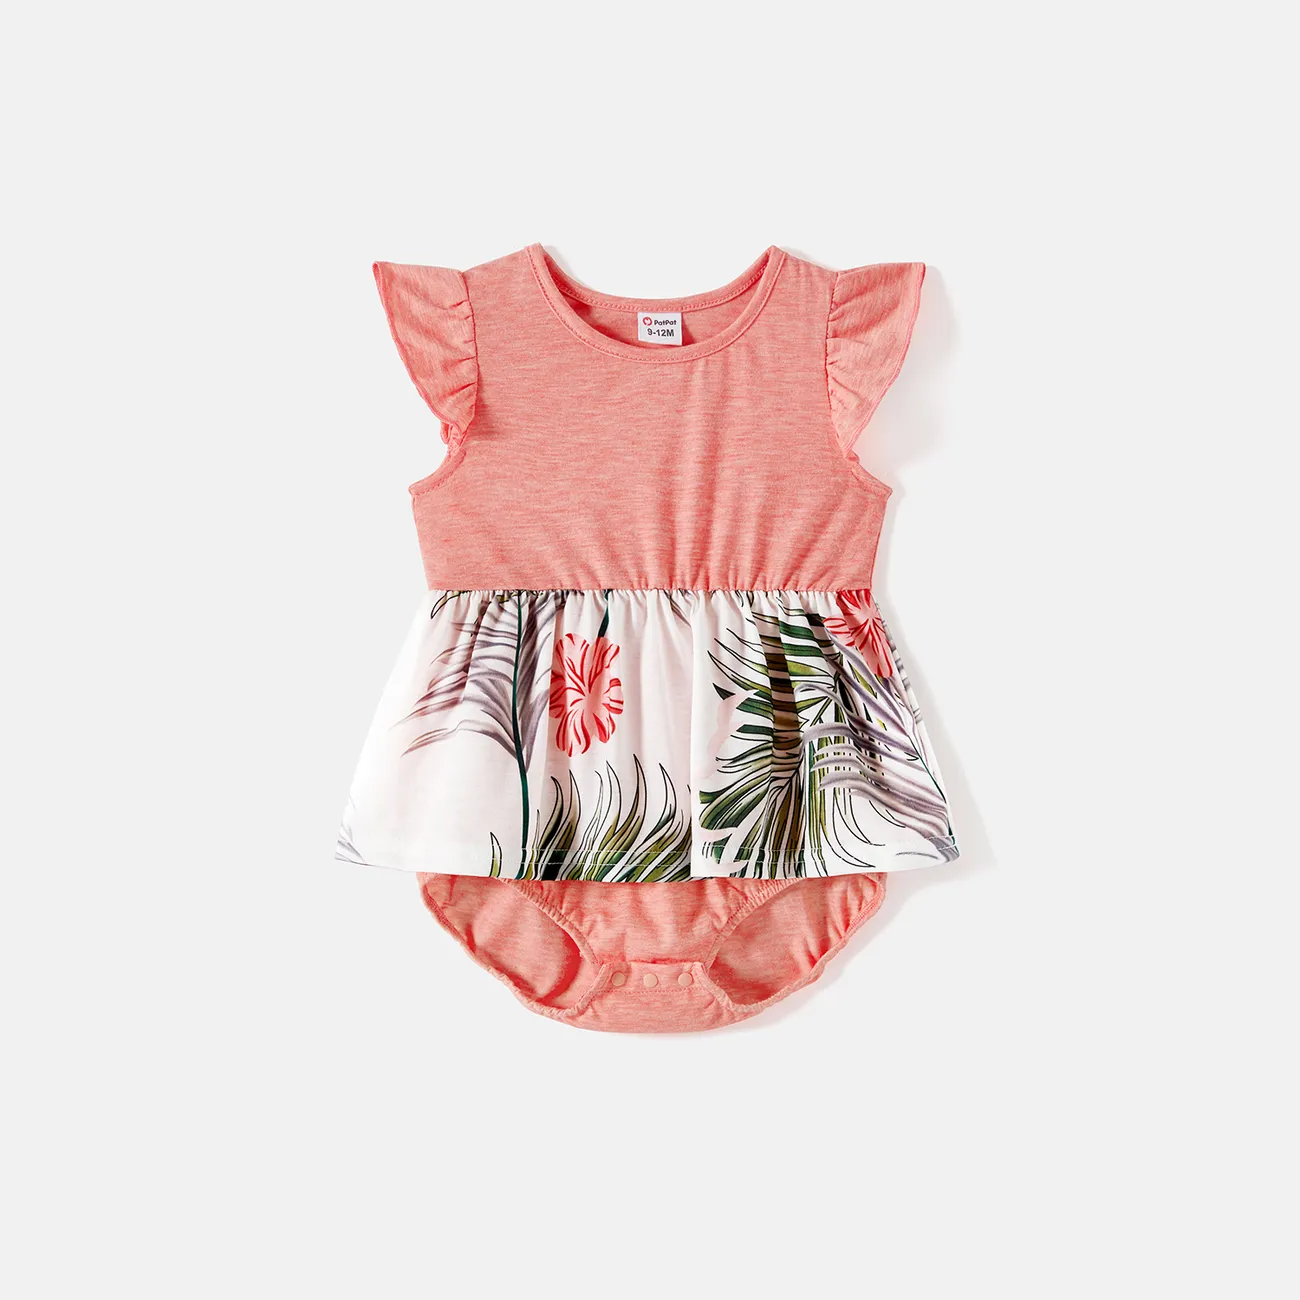 Family Matching Allover Plant Print Cami Dresses and Short-sleeve Colorblock Spliced T-shirts Sets Colorful big image 1